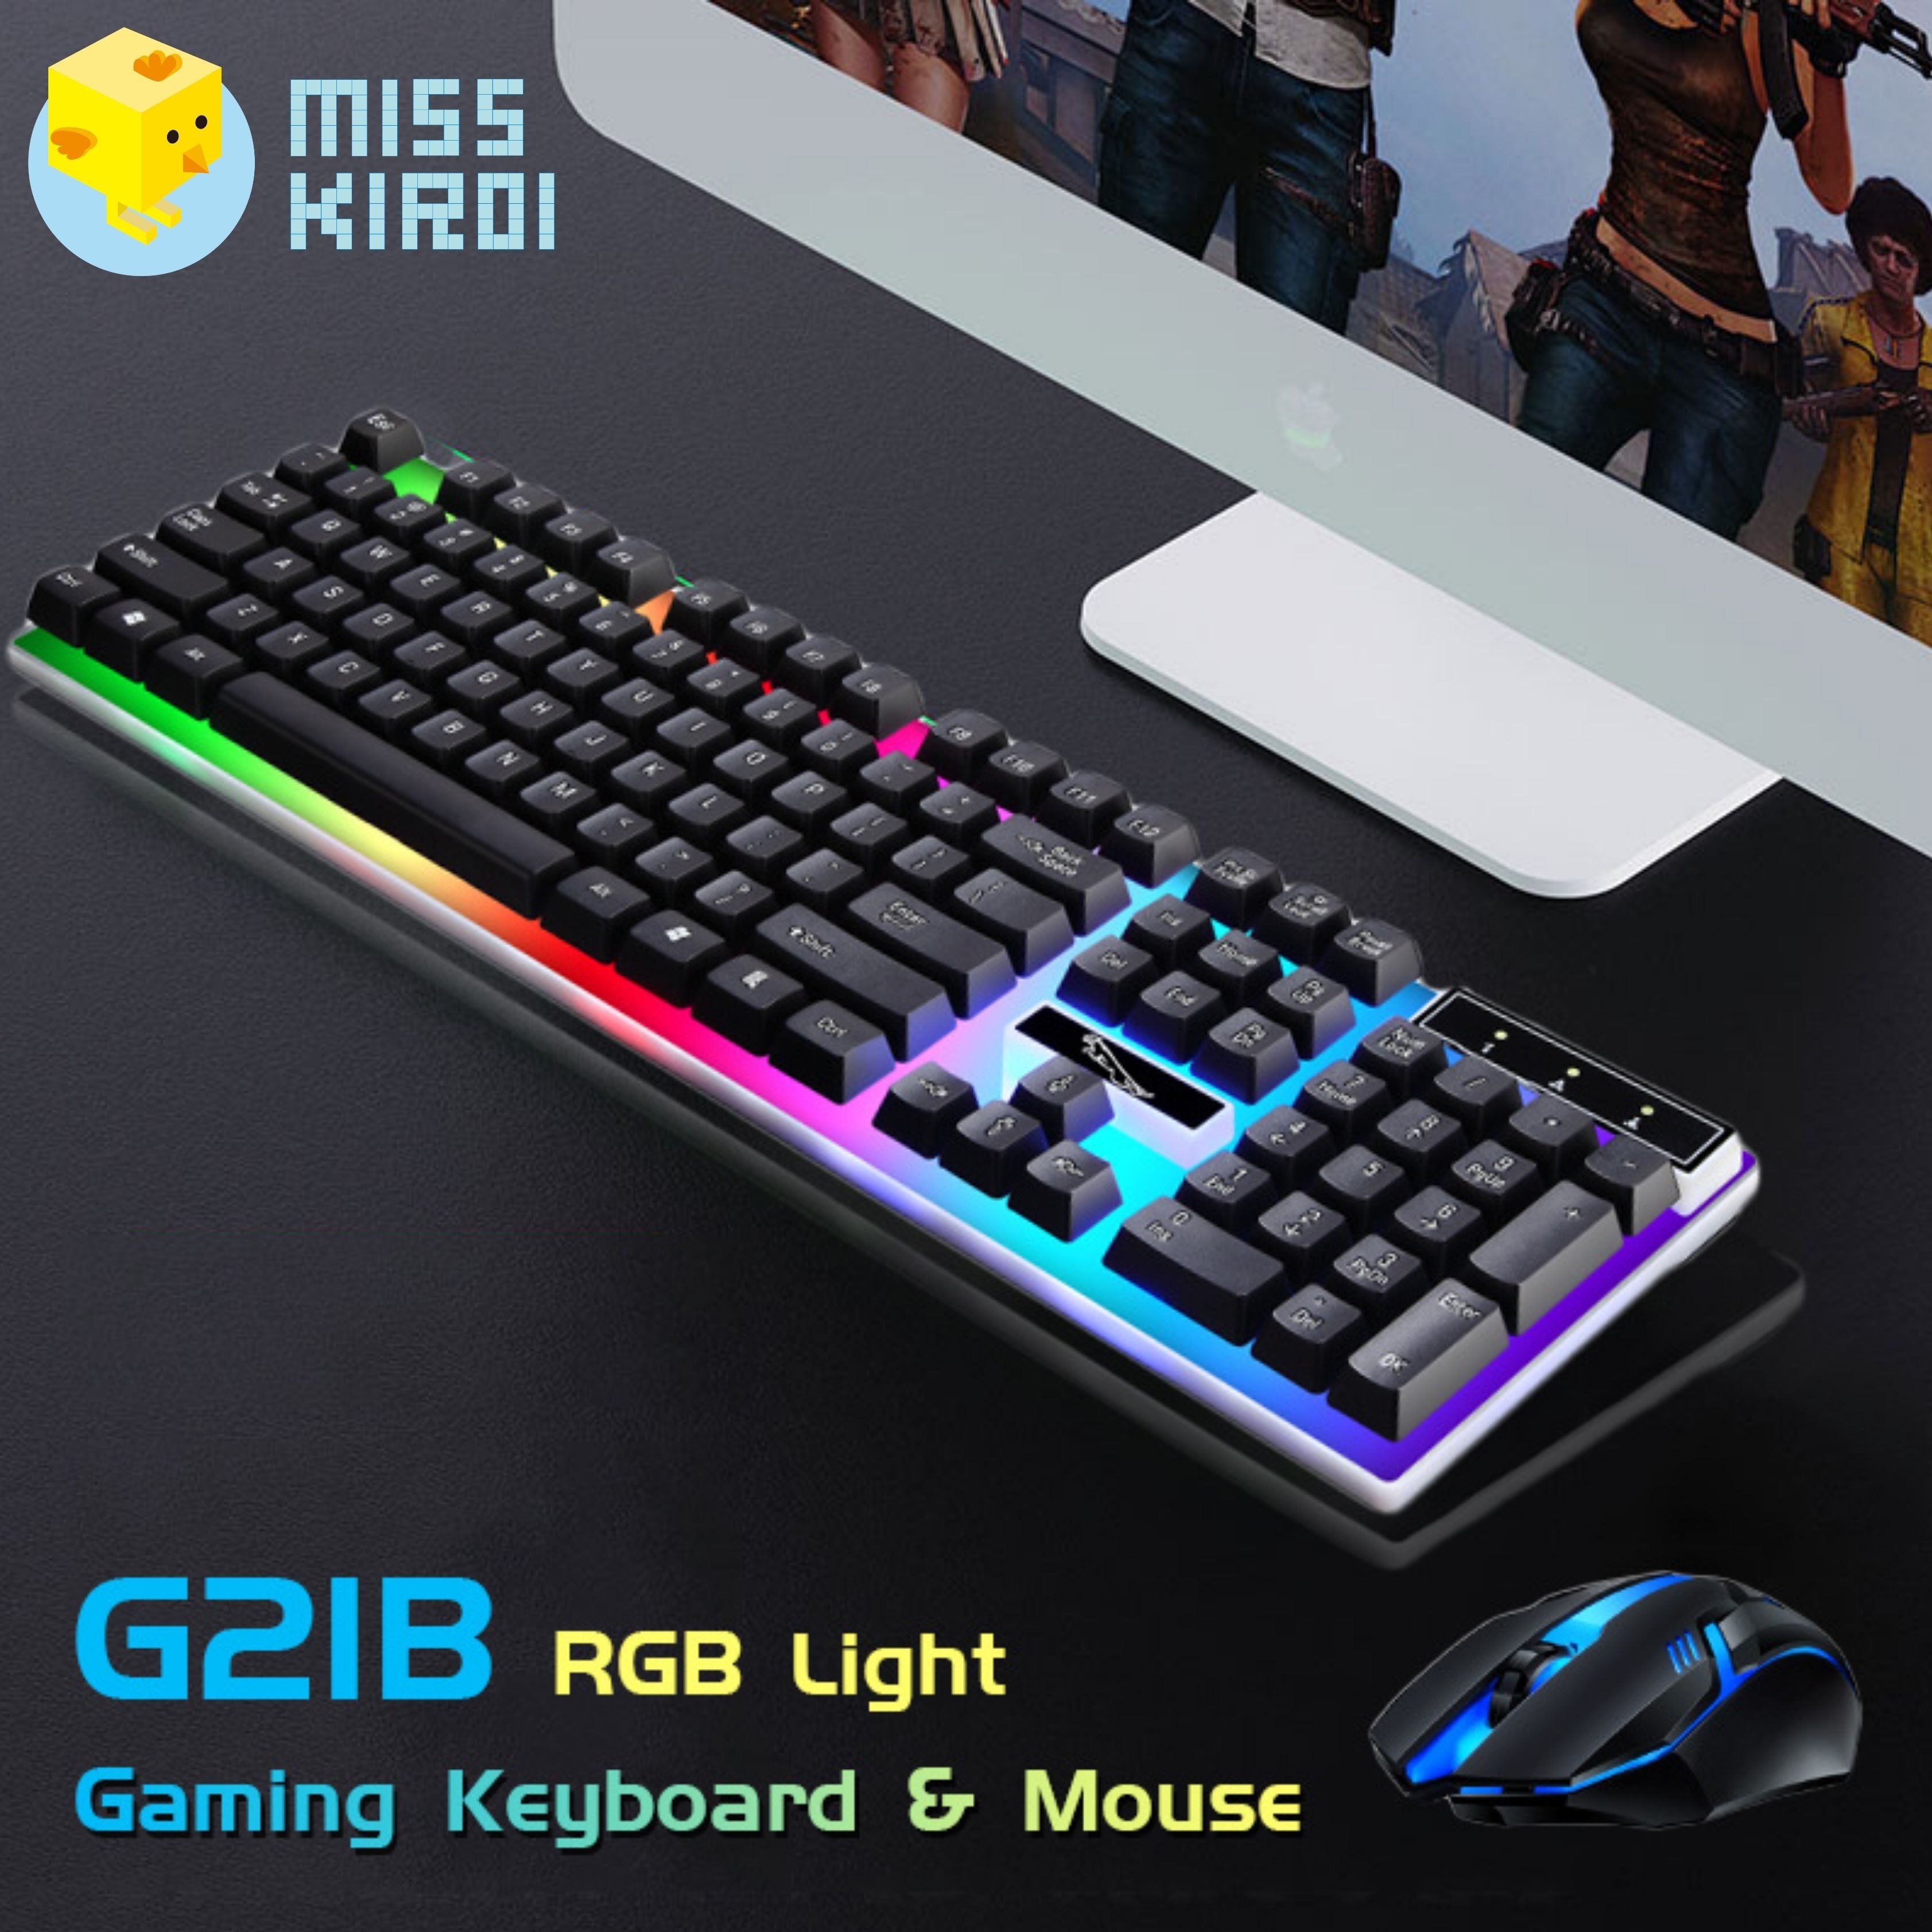 Miss Kiroi G21B Keyboard and Mouse Combo Set English Layout แป้นพิมพ์สำหรับเล่นเกม Office/Gaming Mechanical Feeling 104 Round Key USB Wired RGB LED Backlight